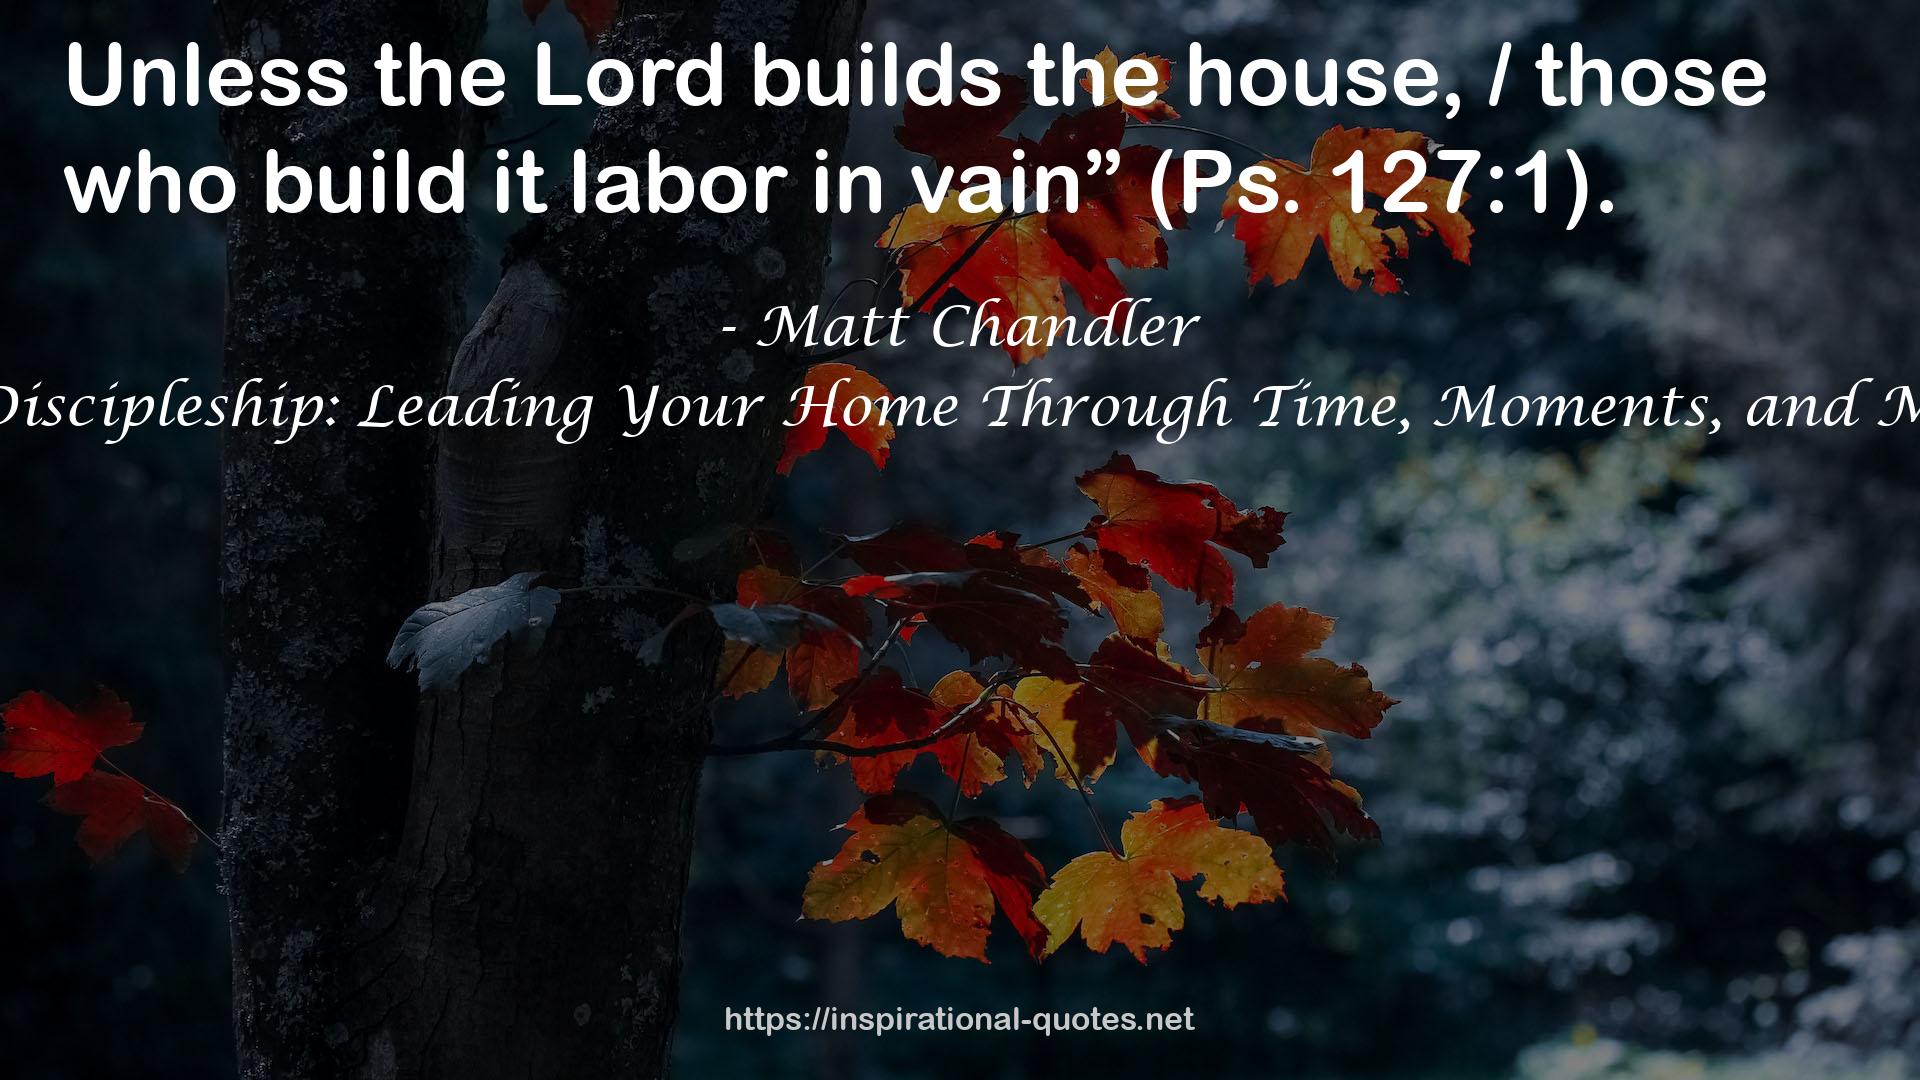 Family Discipleship: Leading Your Home Through Time, Moments, and Milestones QUOTES